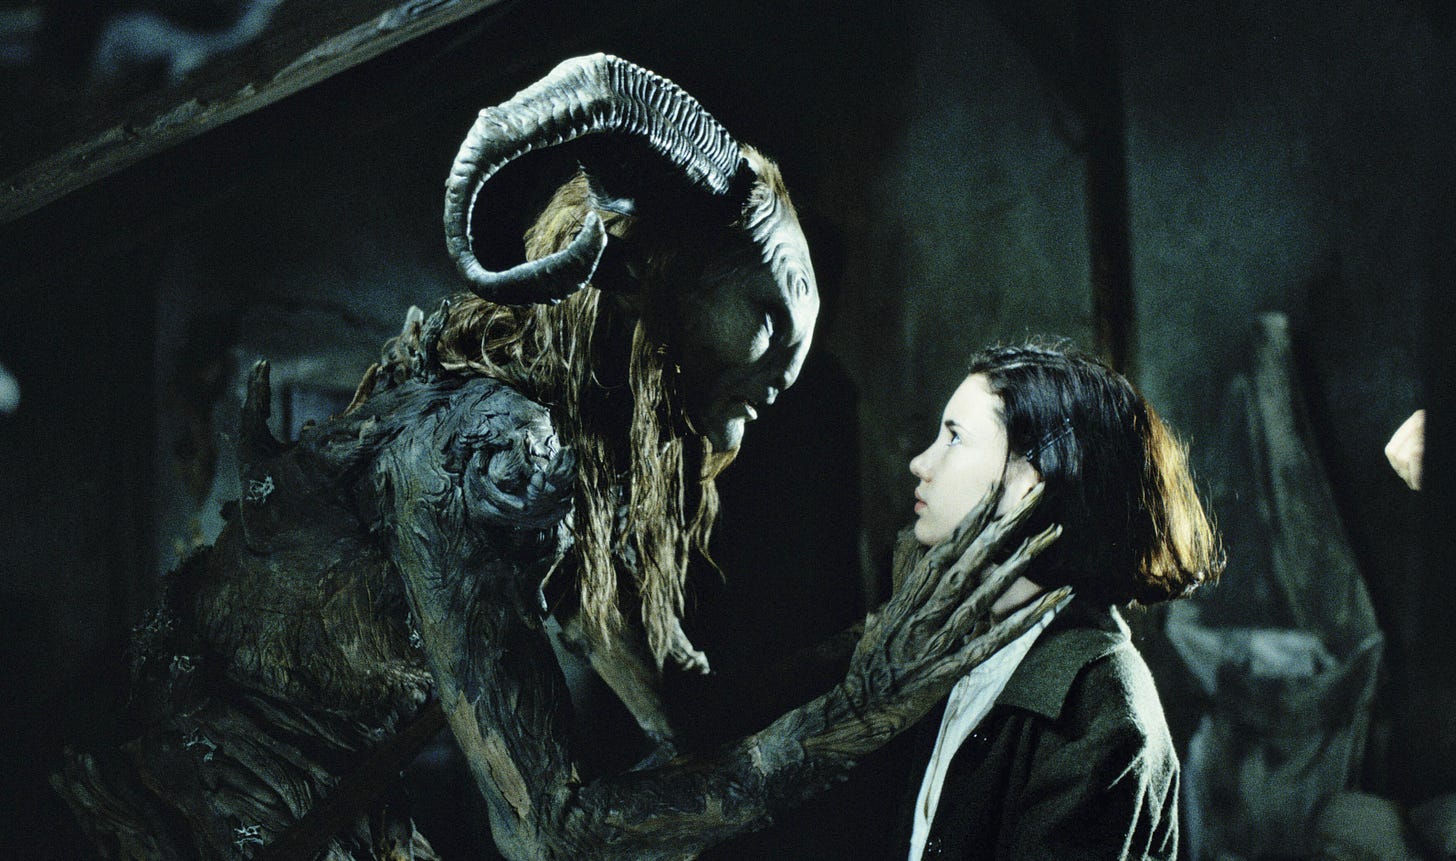 In Pan’s Labyrinth, Ofelia, played by Ivana Baquero, meets the Faun, played by Doug Jones and voiced by Pablo Adán